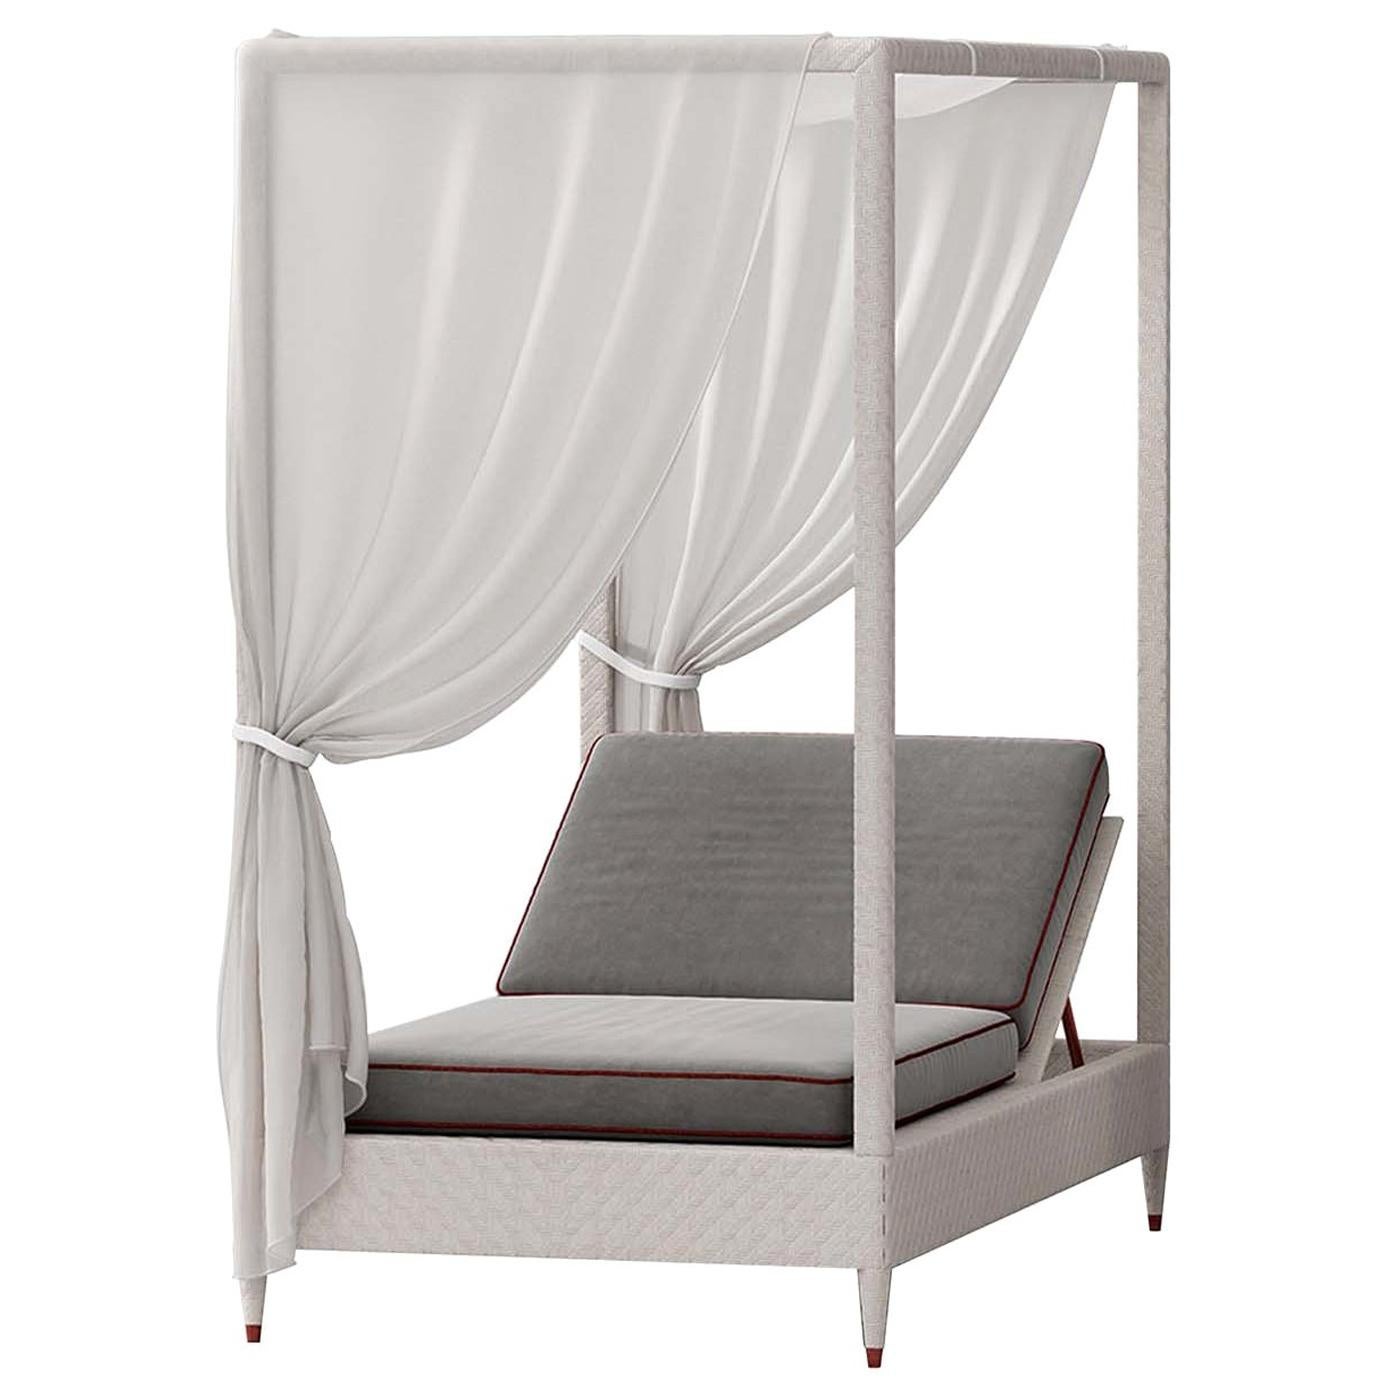 White 1-Seat Daybed with Canopy